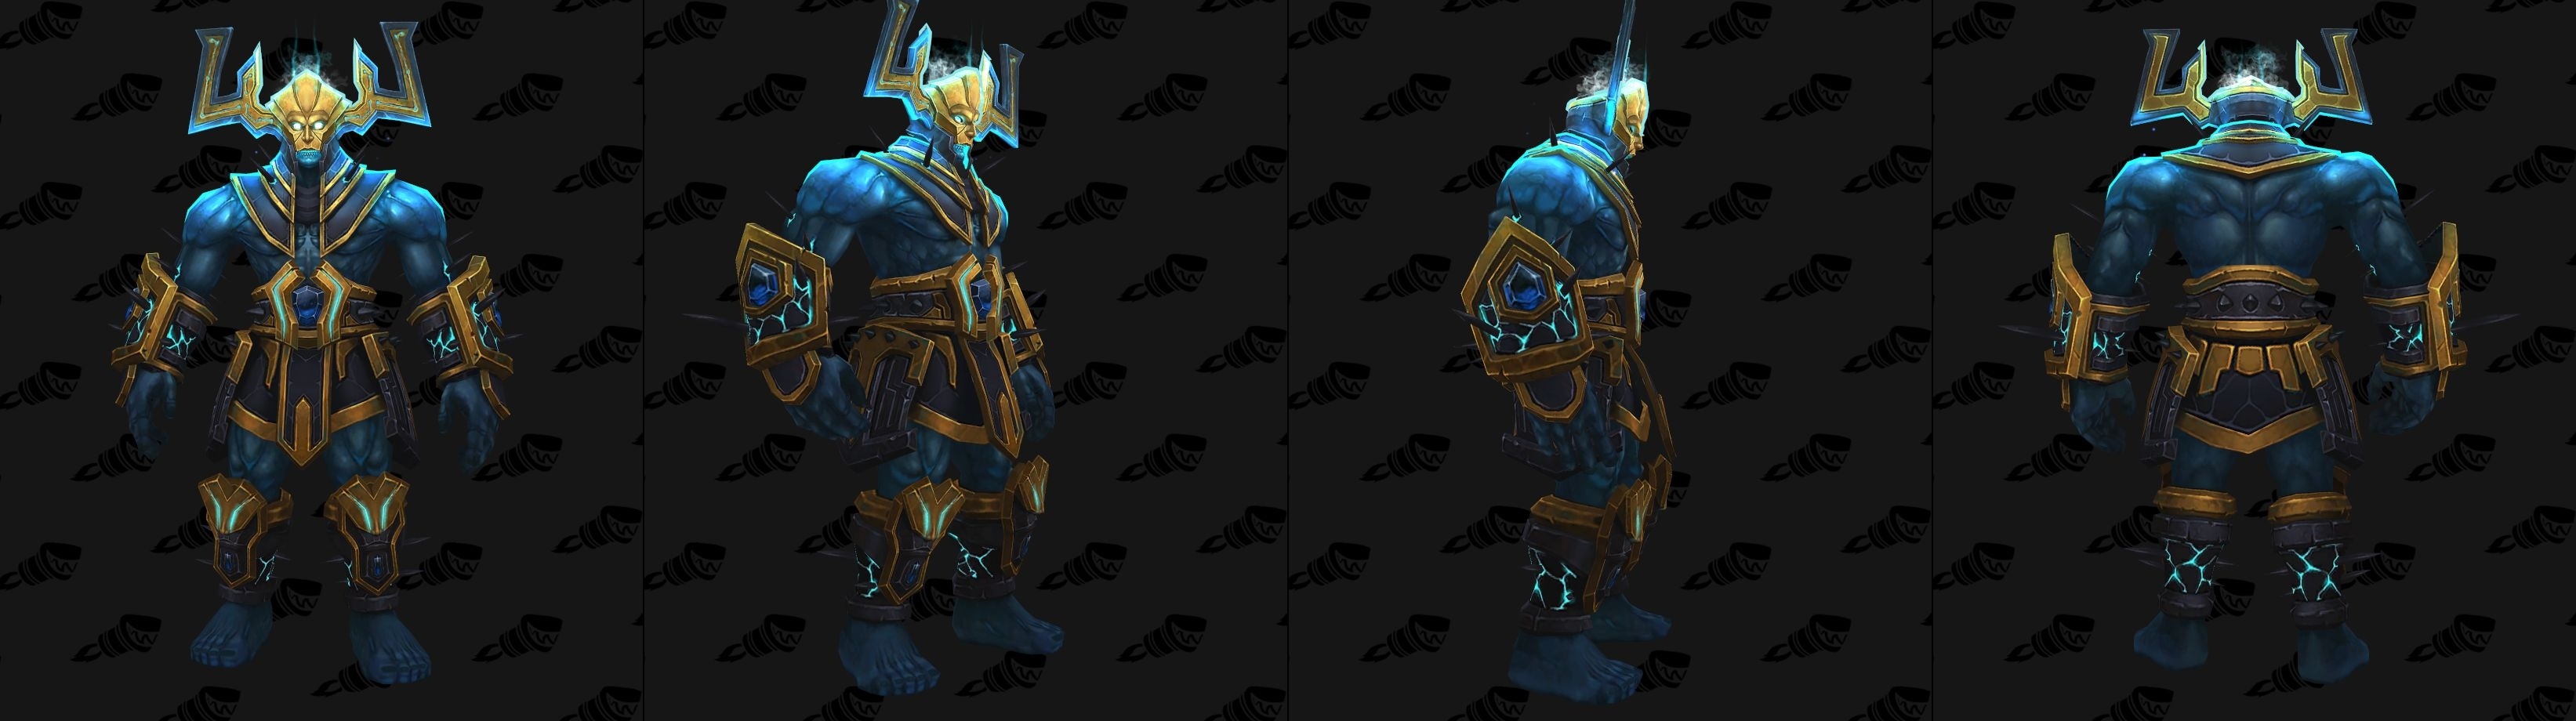 Argus the Unmaker: What We Know the Final Boss Antorus - Wowhead